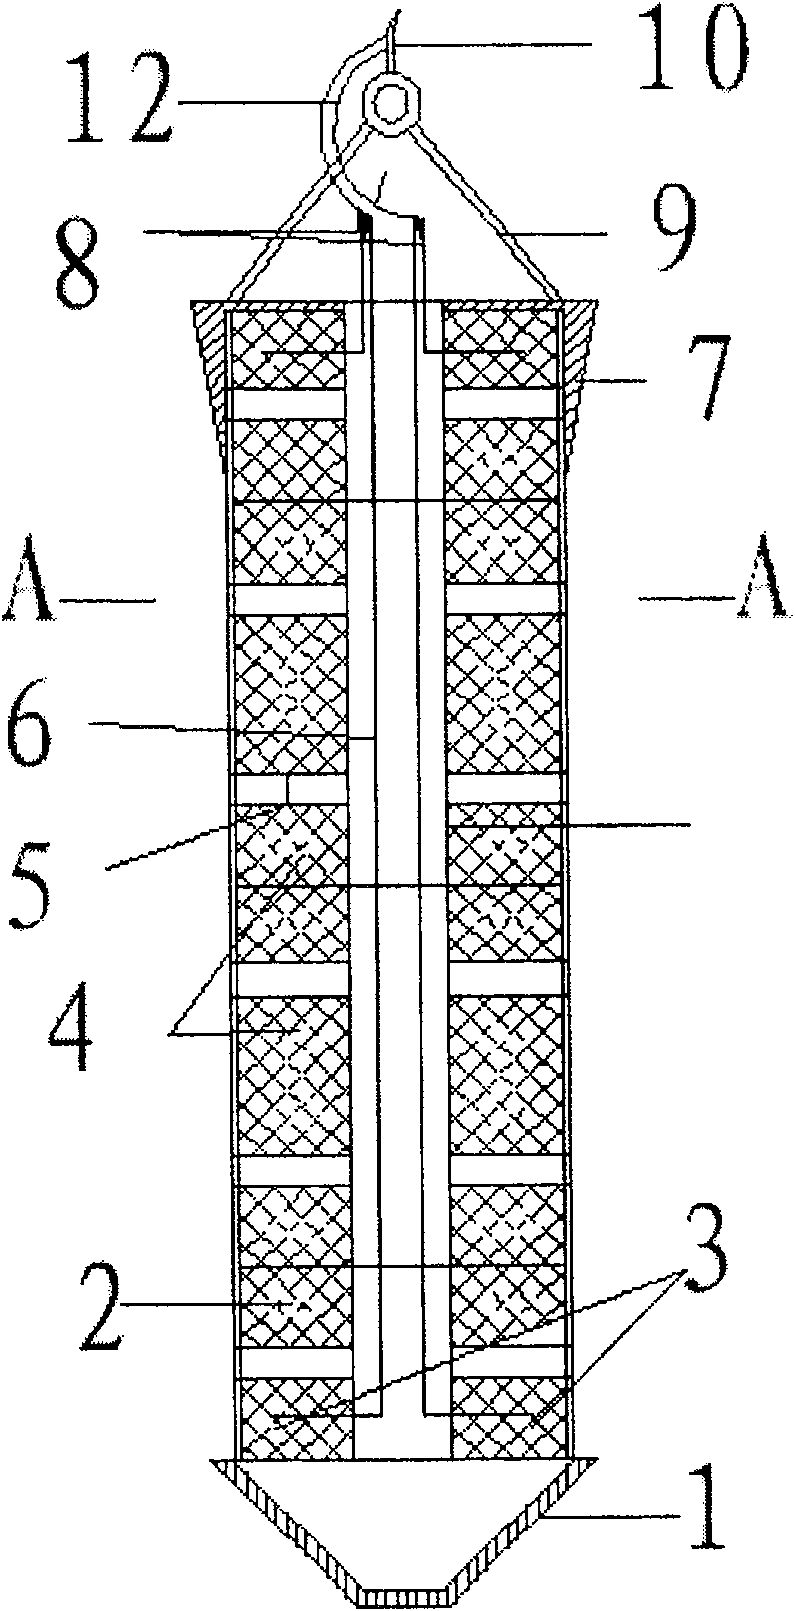 Sound wave shock and pulse combustion type pressing crack apparatus